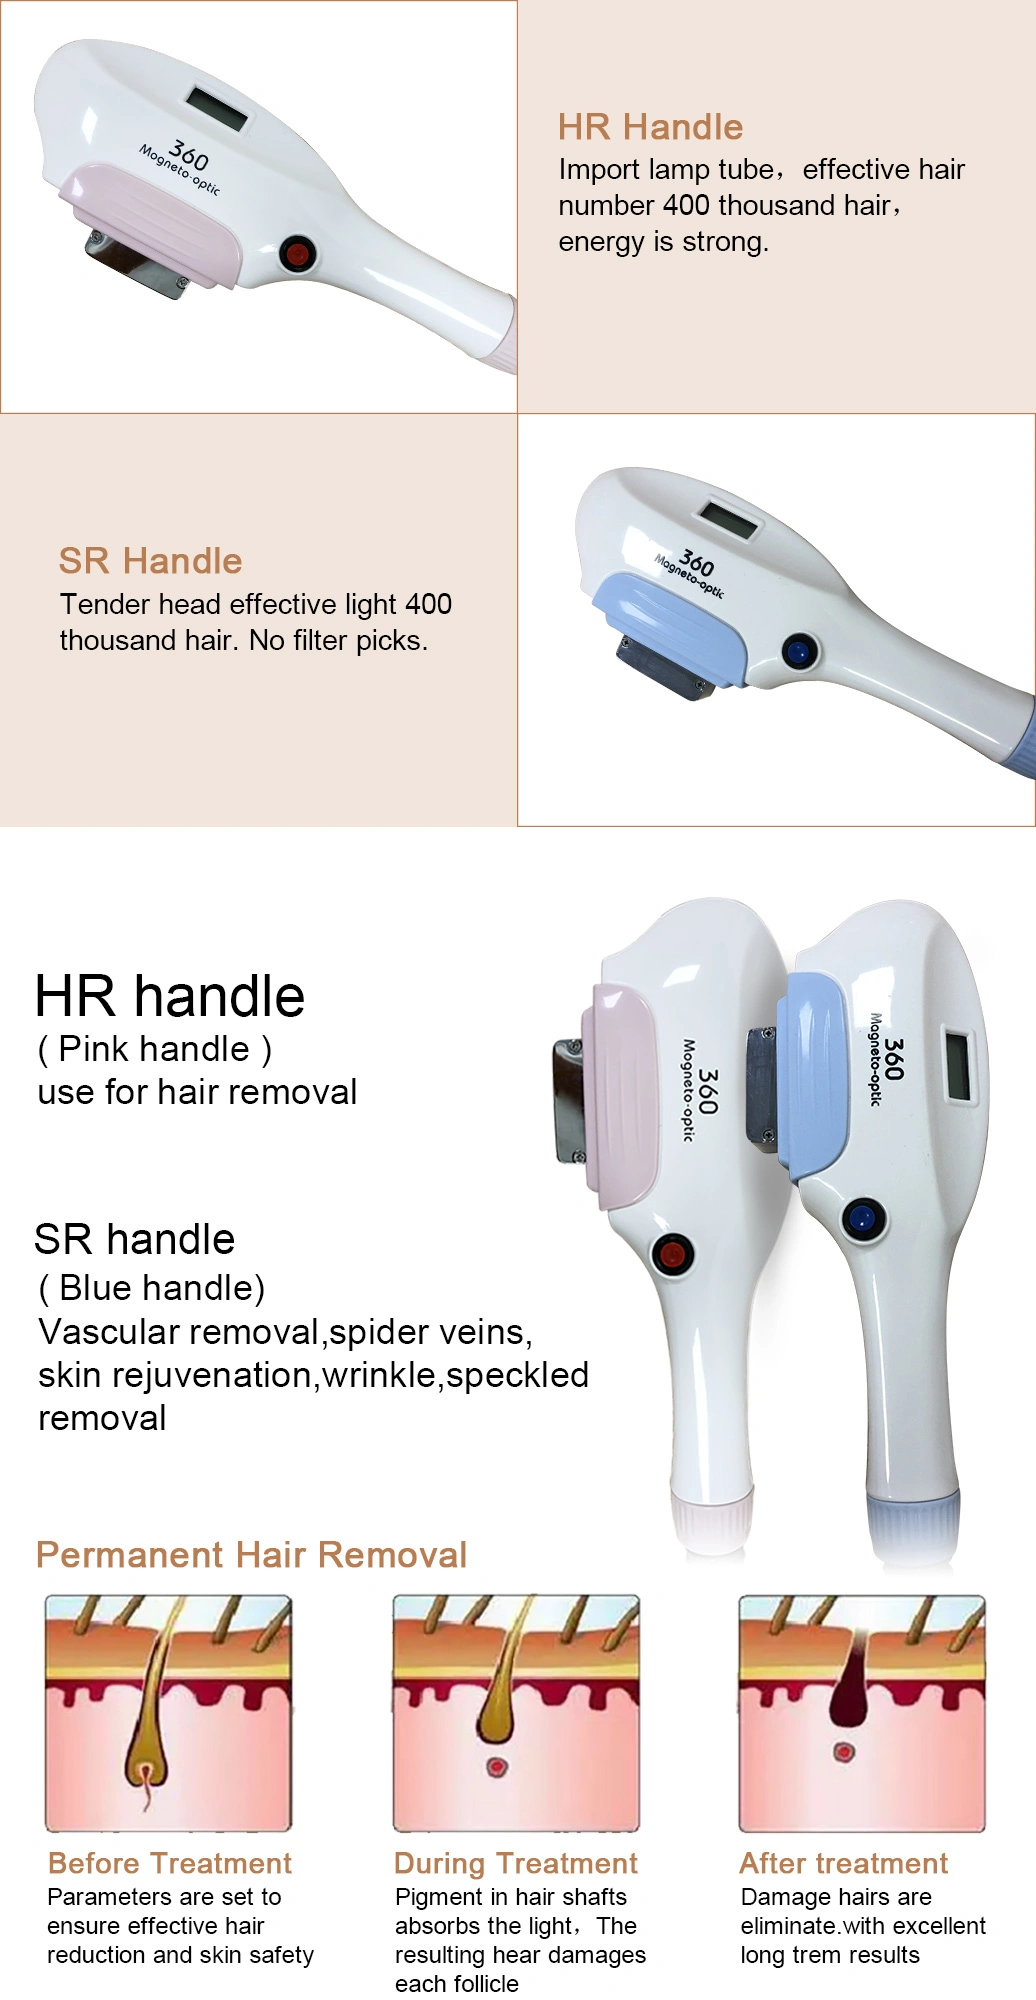 IPL Hair Removal Beauty Instrument Refined Product Removal Skin Care Beauty Equipment